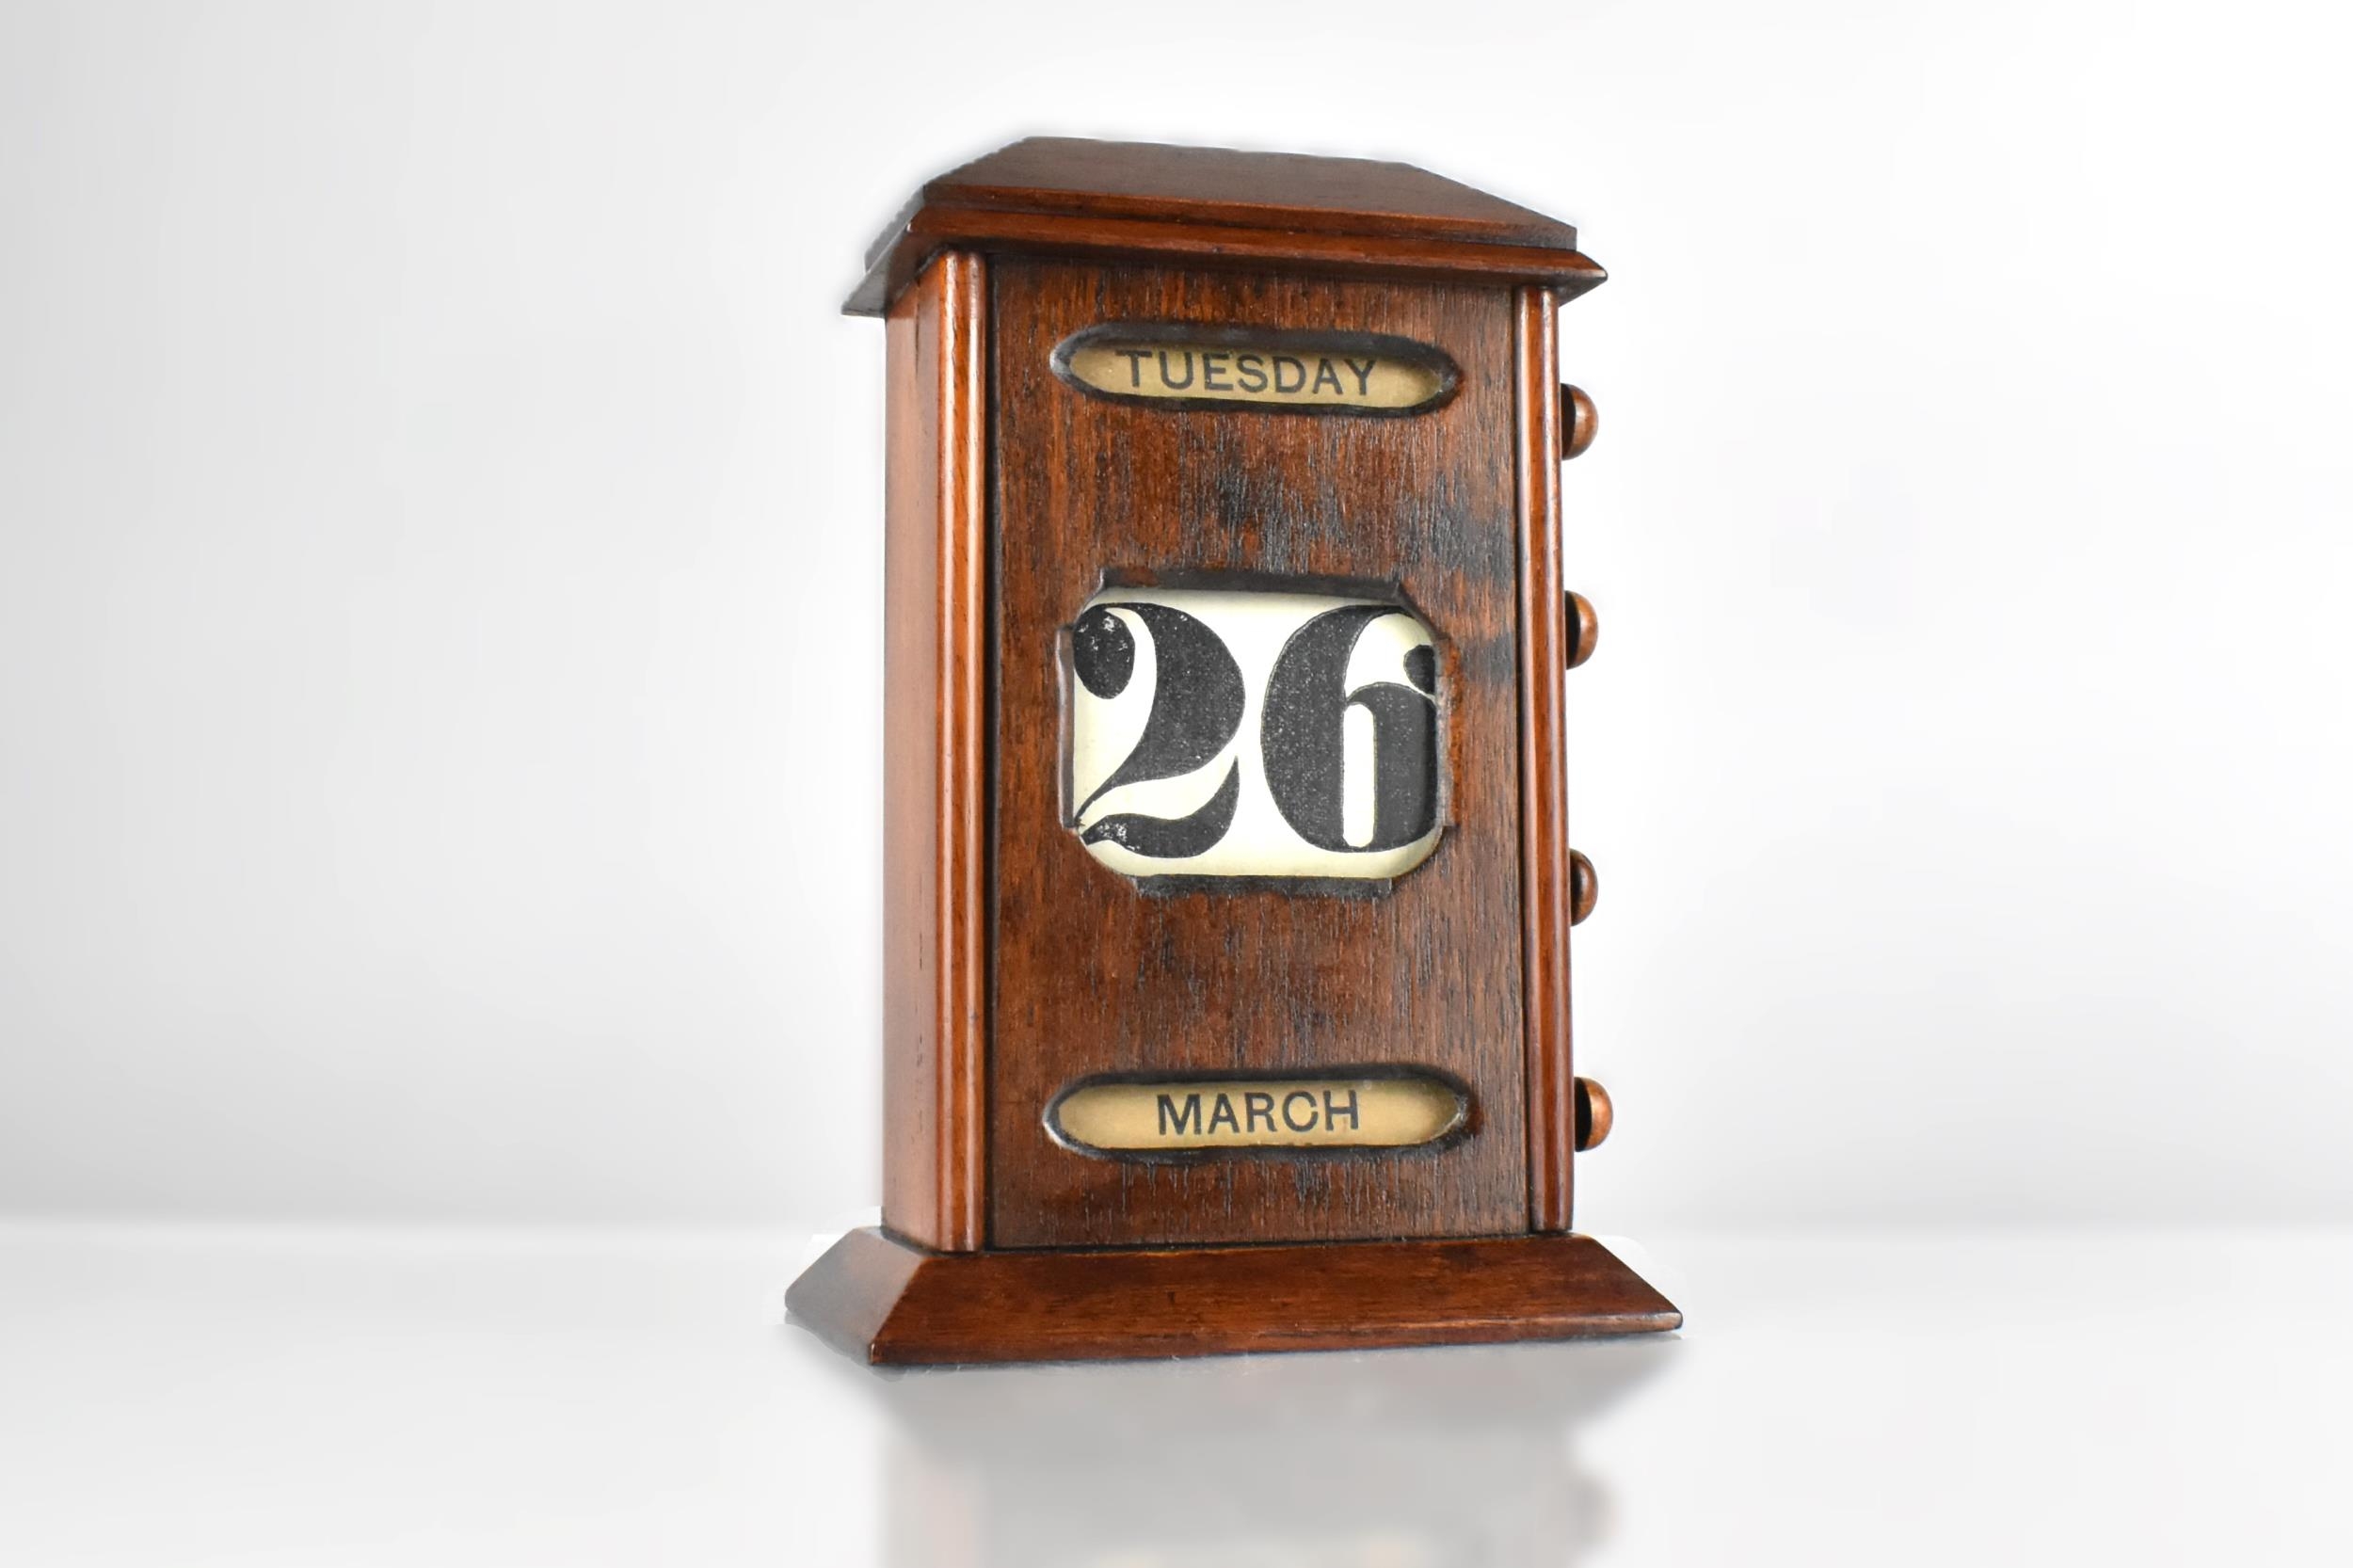 An Edwardian Oak Desktop Perpetual Calendar with Day, Date and Month, 21cm High